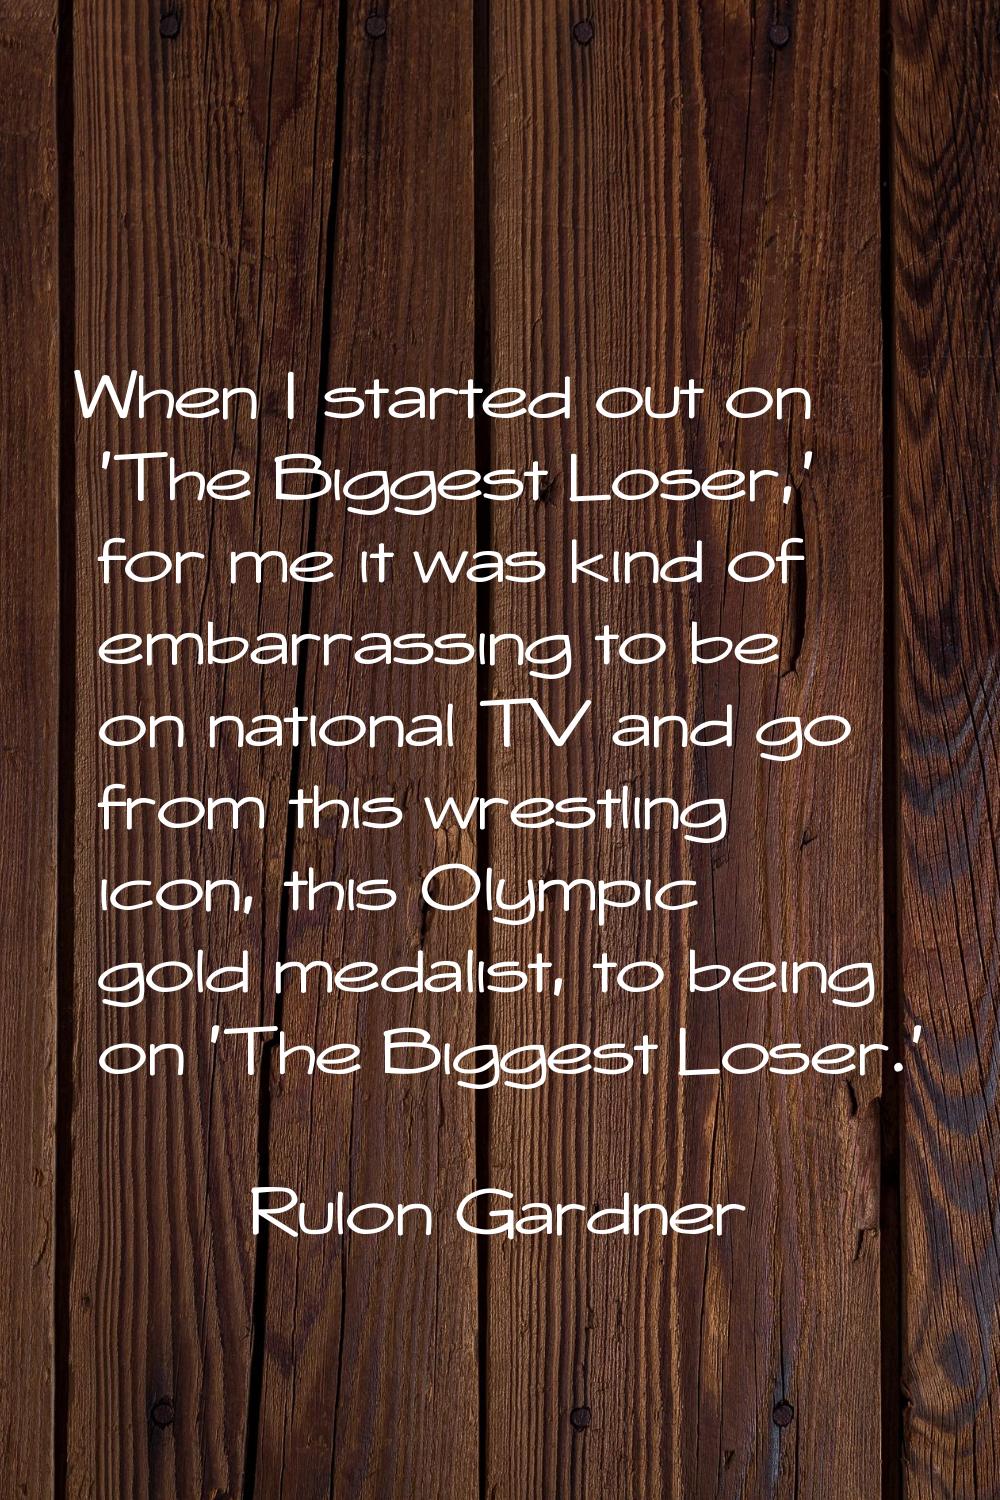 When I started out on 'The Biggest Loser,' for me it was kind of embarrassing to be on national TV 